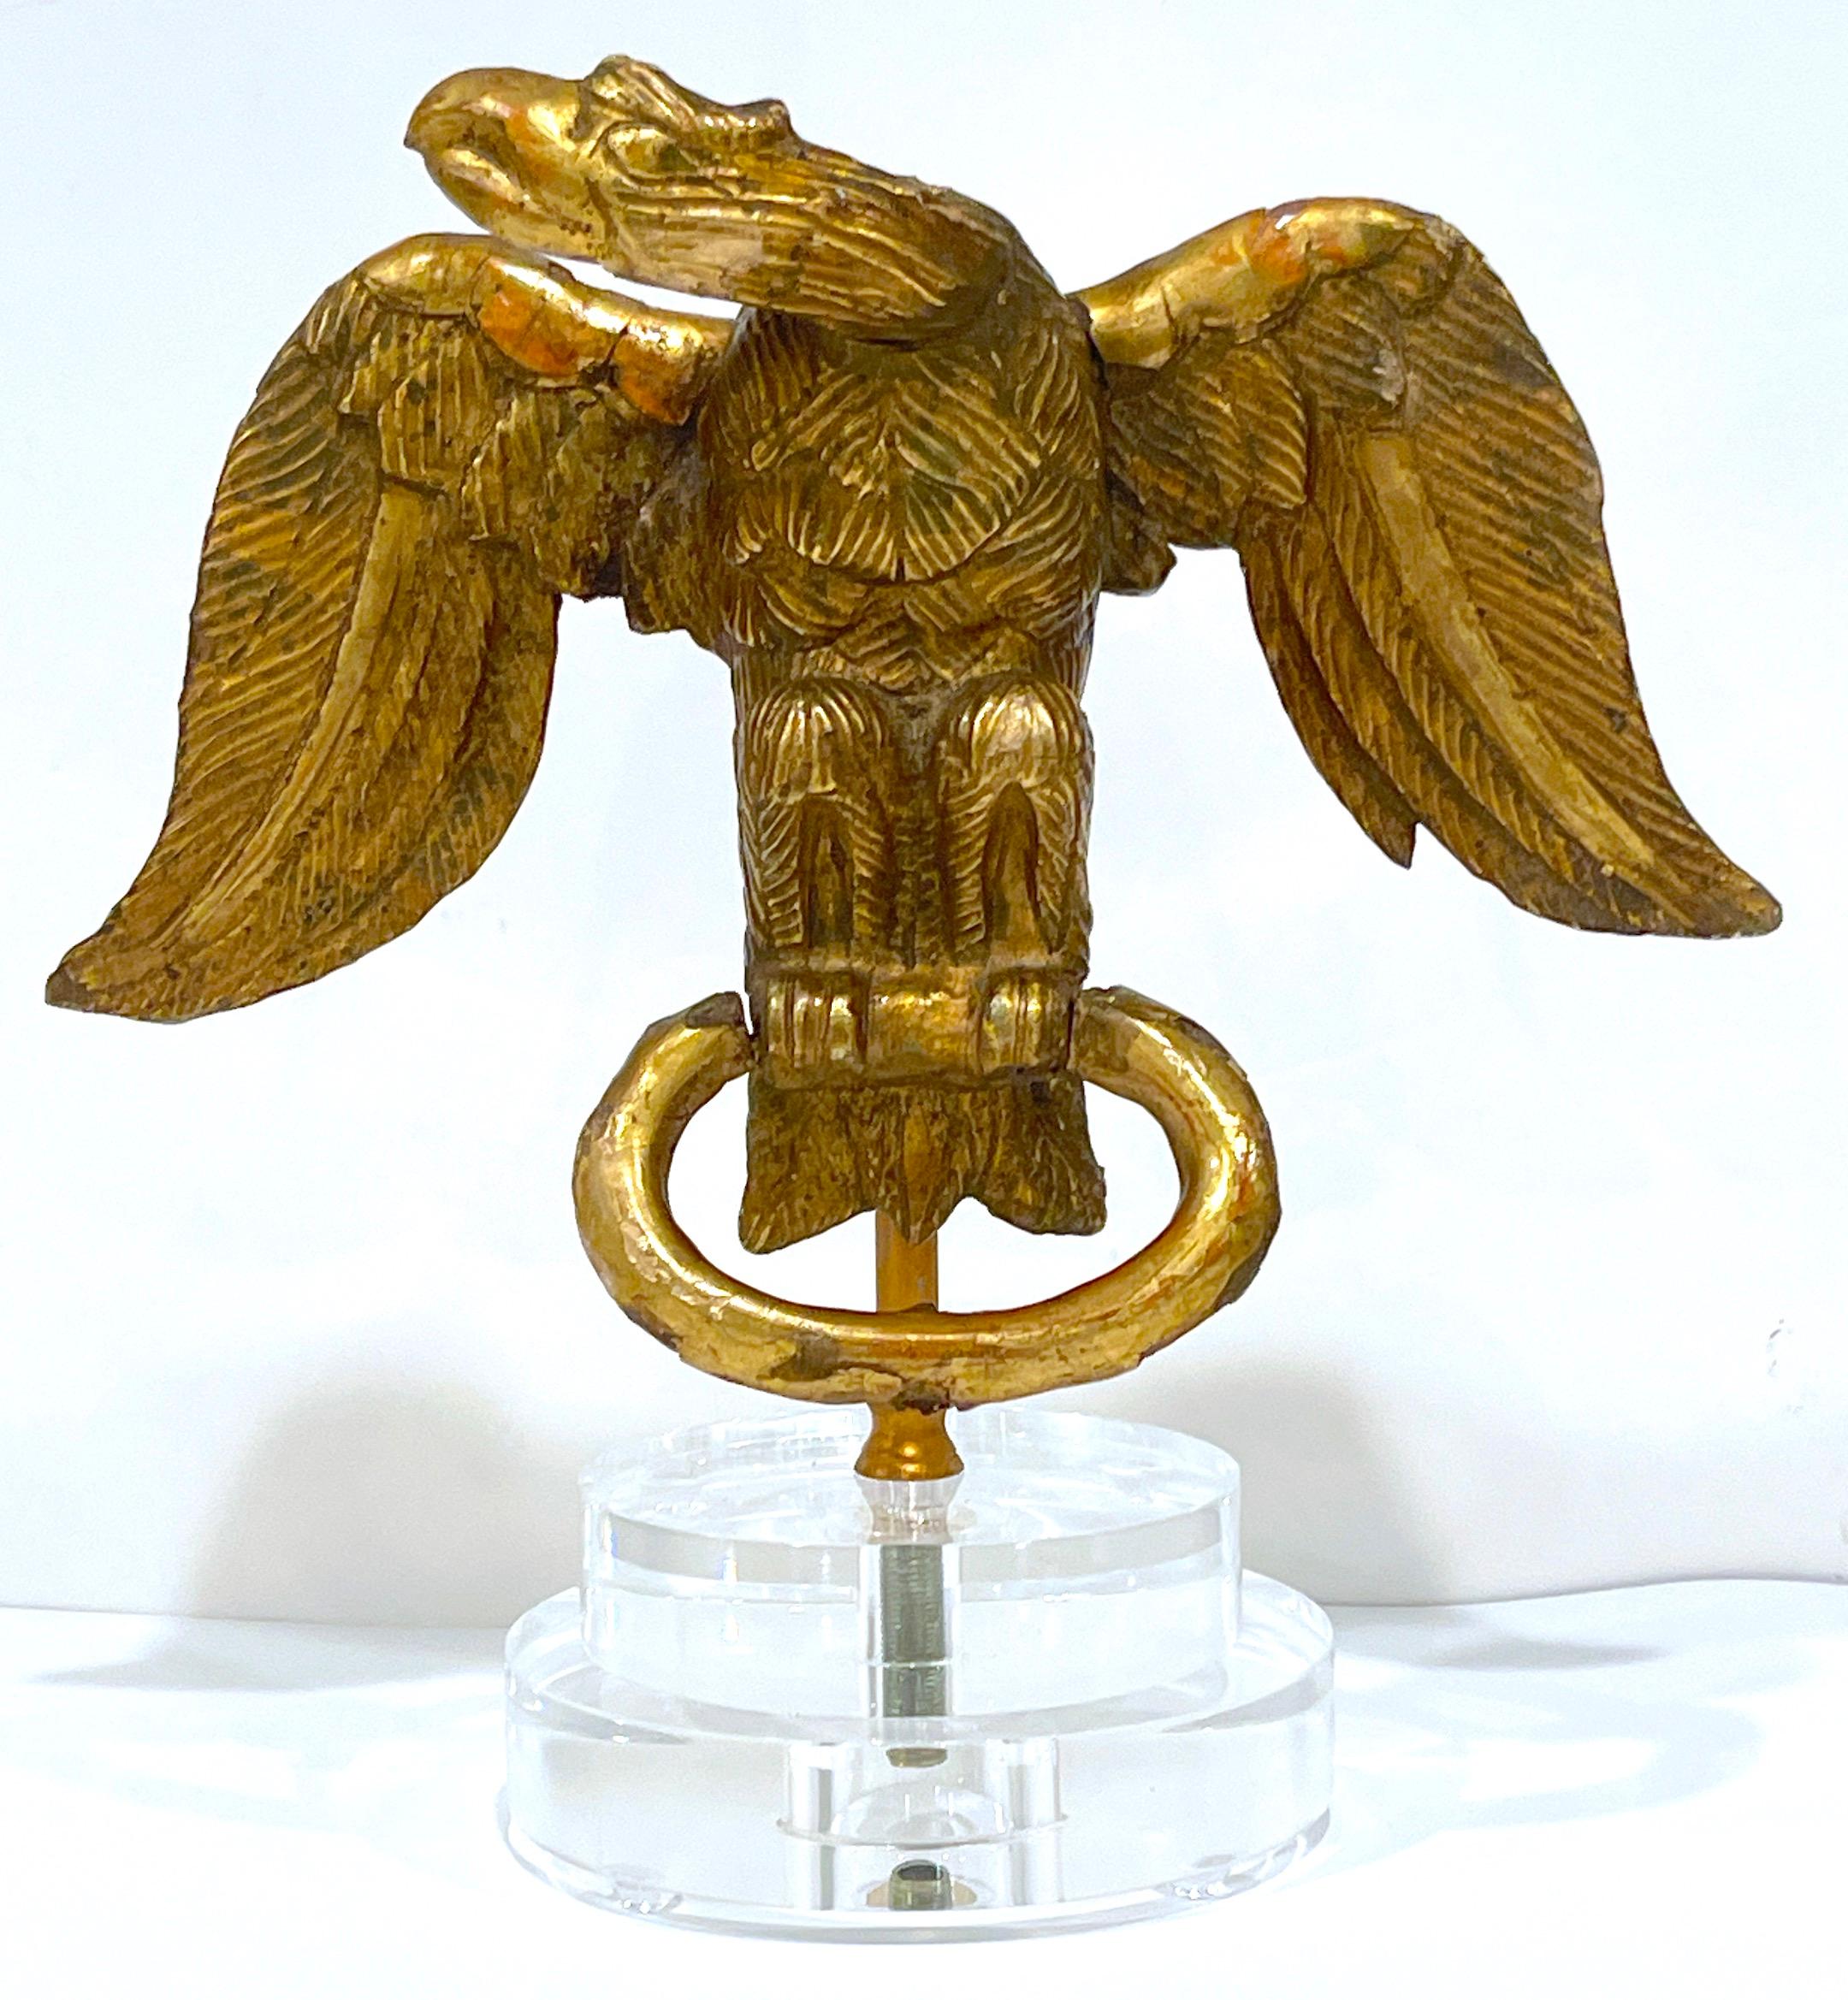 This 18th-century English carved giltwood eagle, hailing from the Georgian period, is a magnificent example of artisan cabinetry from the era. The eagle carving is expertly carved from giltwood and gessoed, showcasing the skill and artistry of the